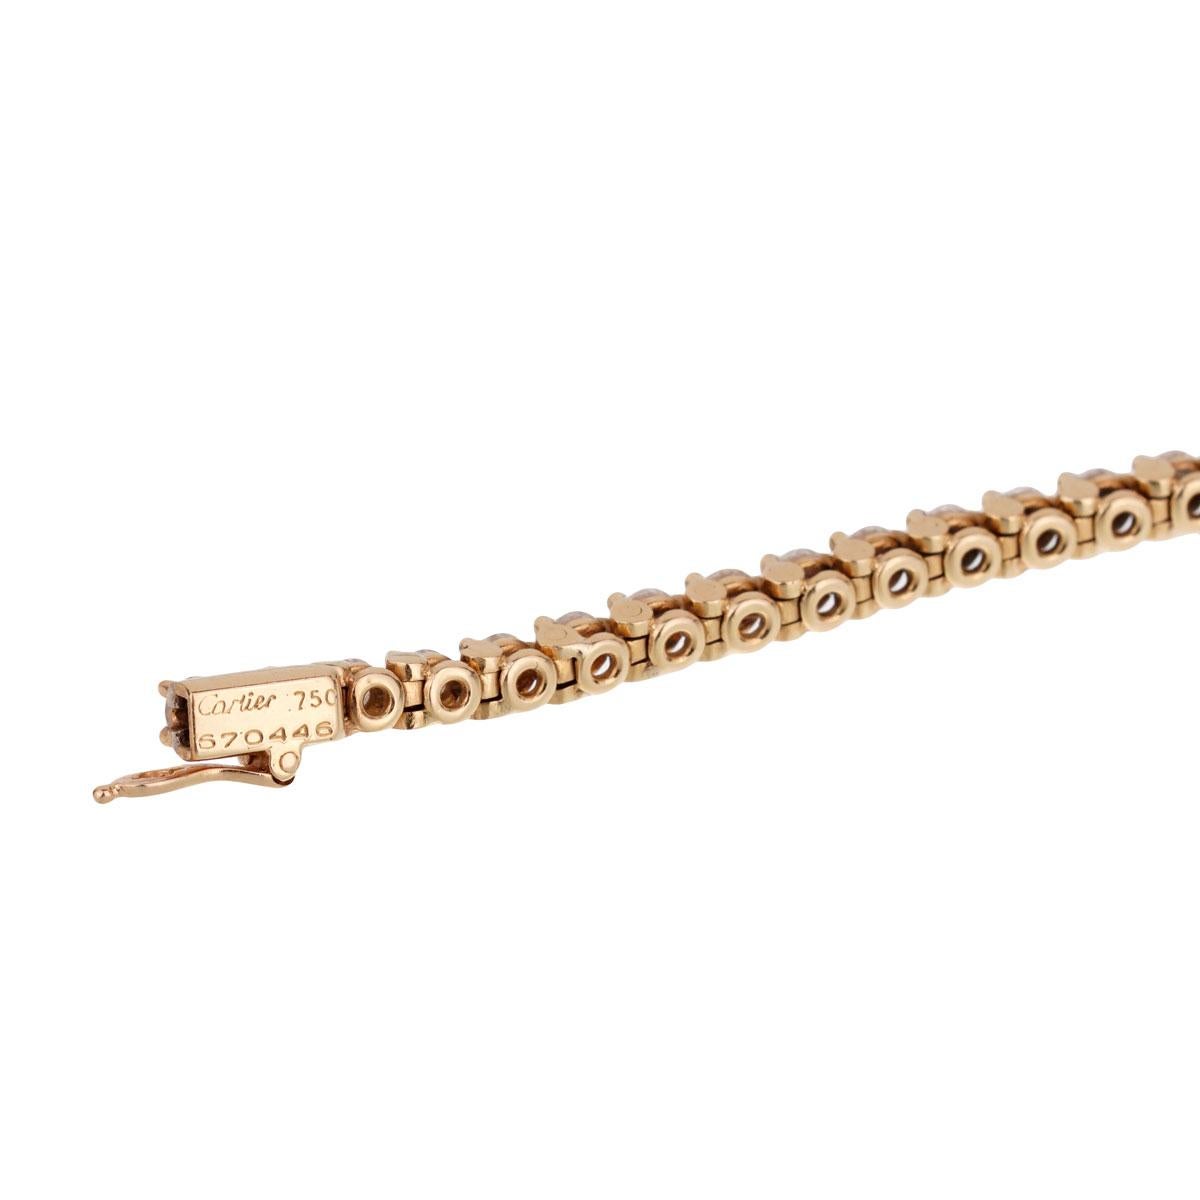 An extremely rare Cartier tennis diamond anklet featuring 77 round brilliant cut diamonds measuring 4ct appx of the finest cartier diamonds set in 18k yellow gold. 

The anklet measures 9.5